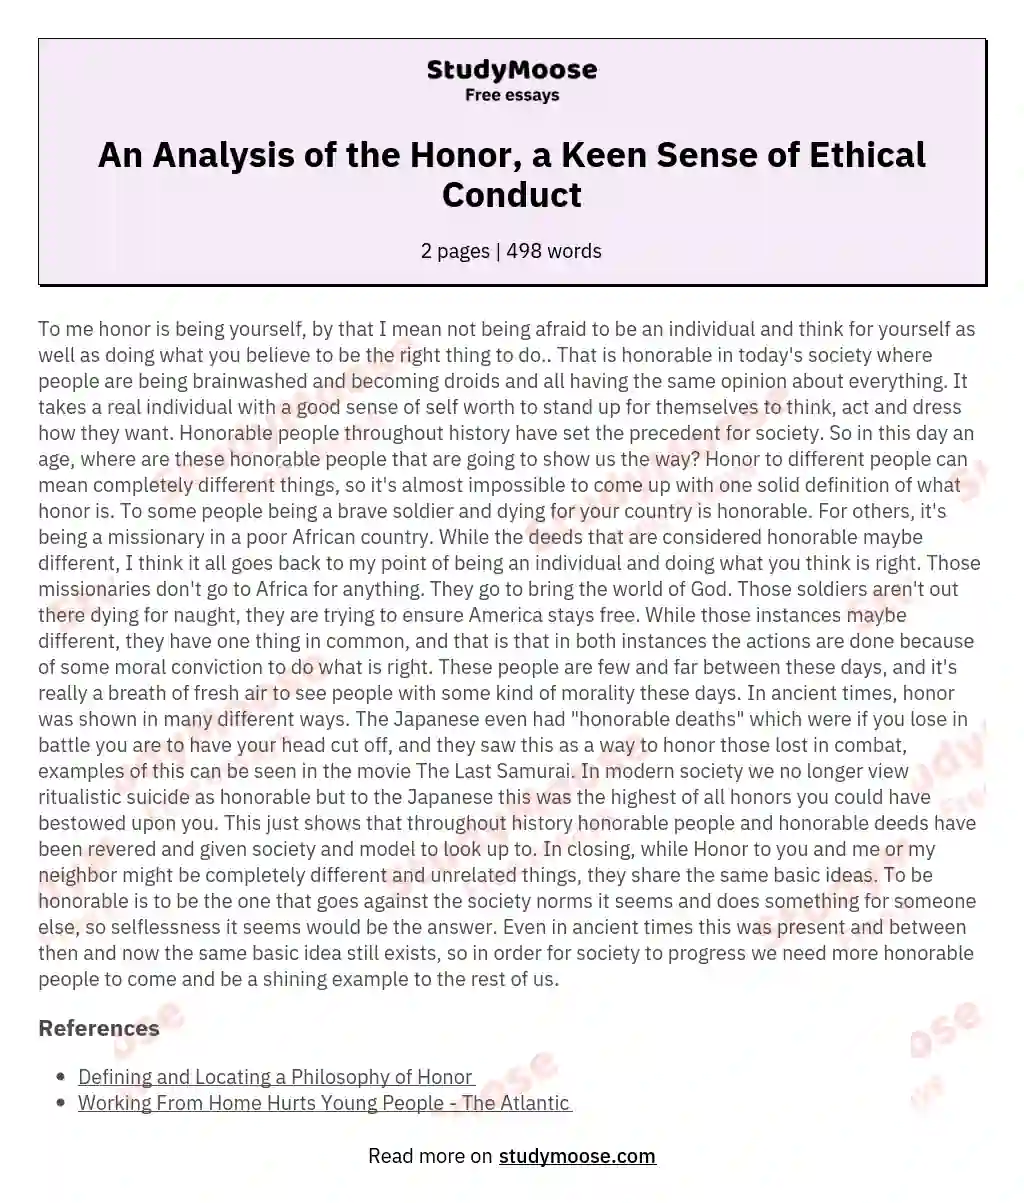 An Analysis of the Honor, a Keen Sense of Ethical Conduct essay